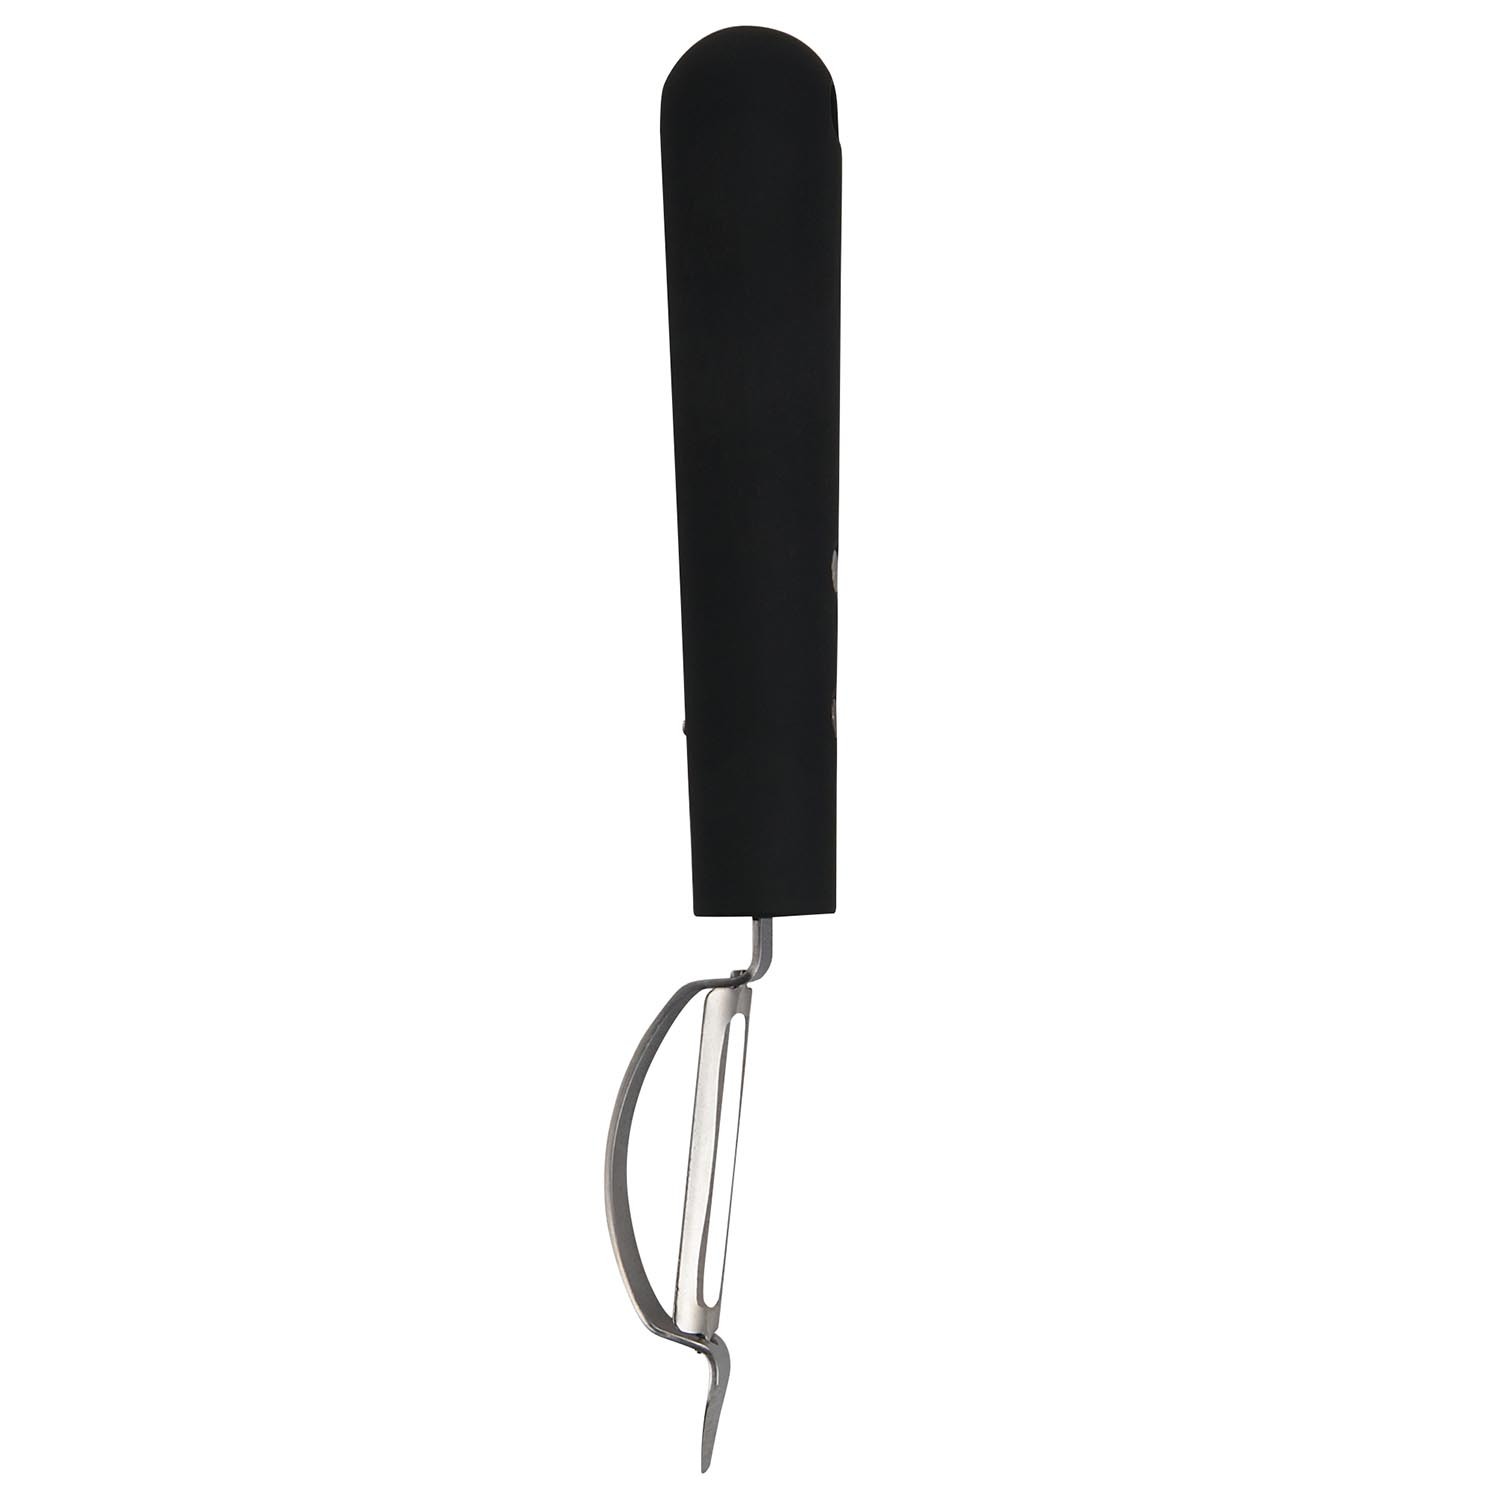 Kitchenmaster Peeler with Soft Touch Handle - Black Image 2